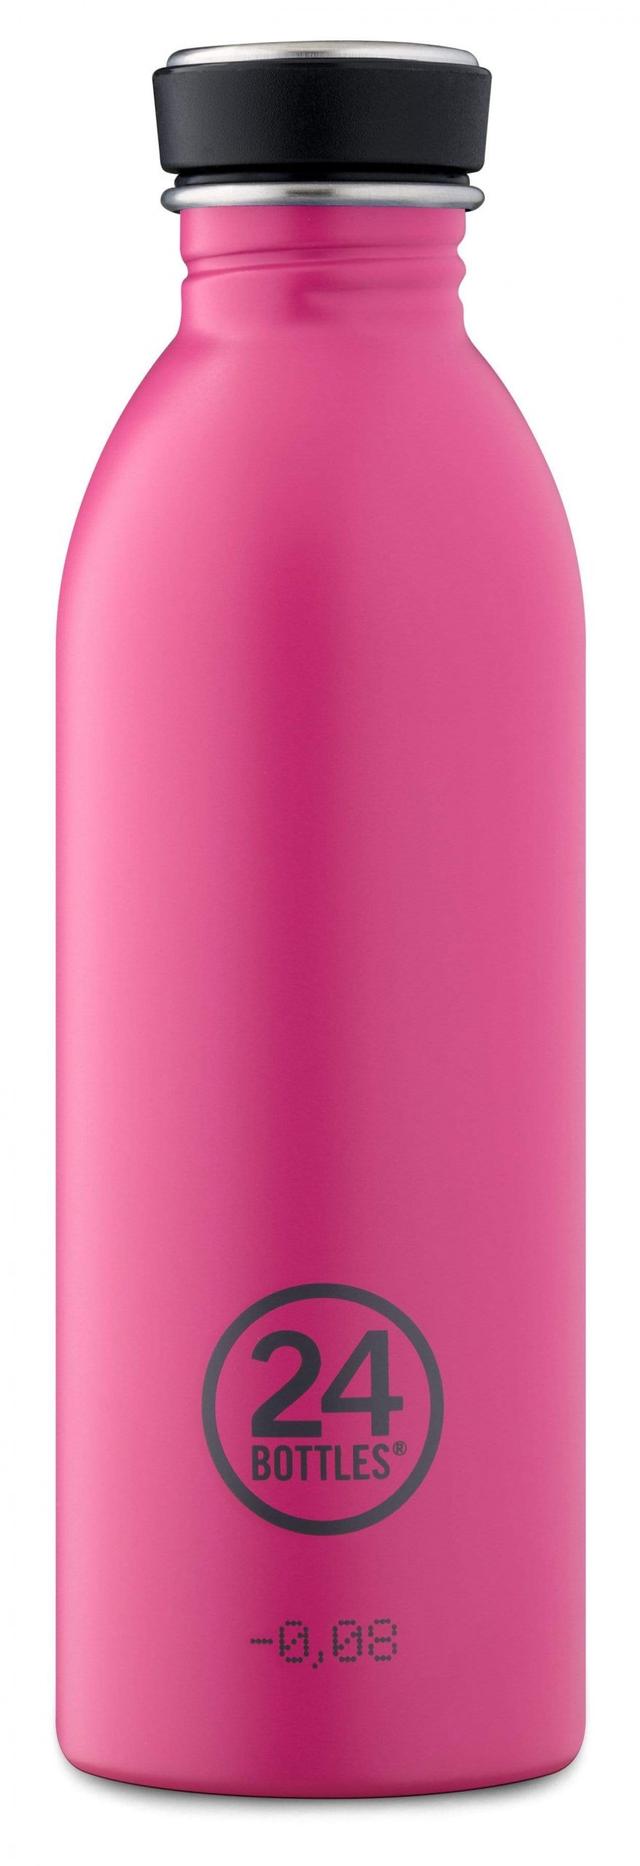 24bottles urban bottle 500ml lightest insulated stainless steel water bottle eco friendly reusable bpa free hot cold modern portable leak proof for travel office home gym passion pink - SW1hZ2U6Njg3NjY=